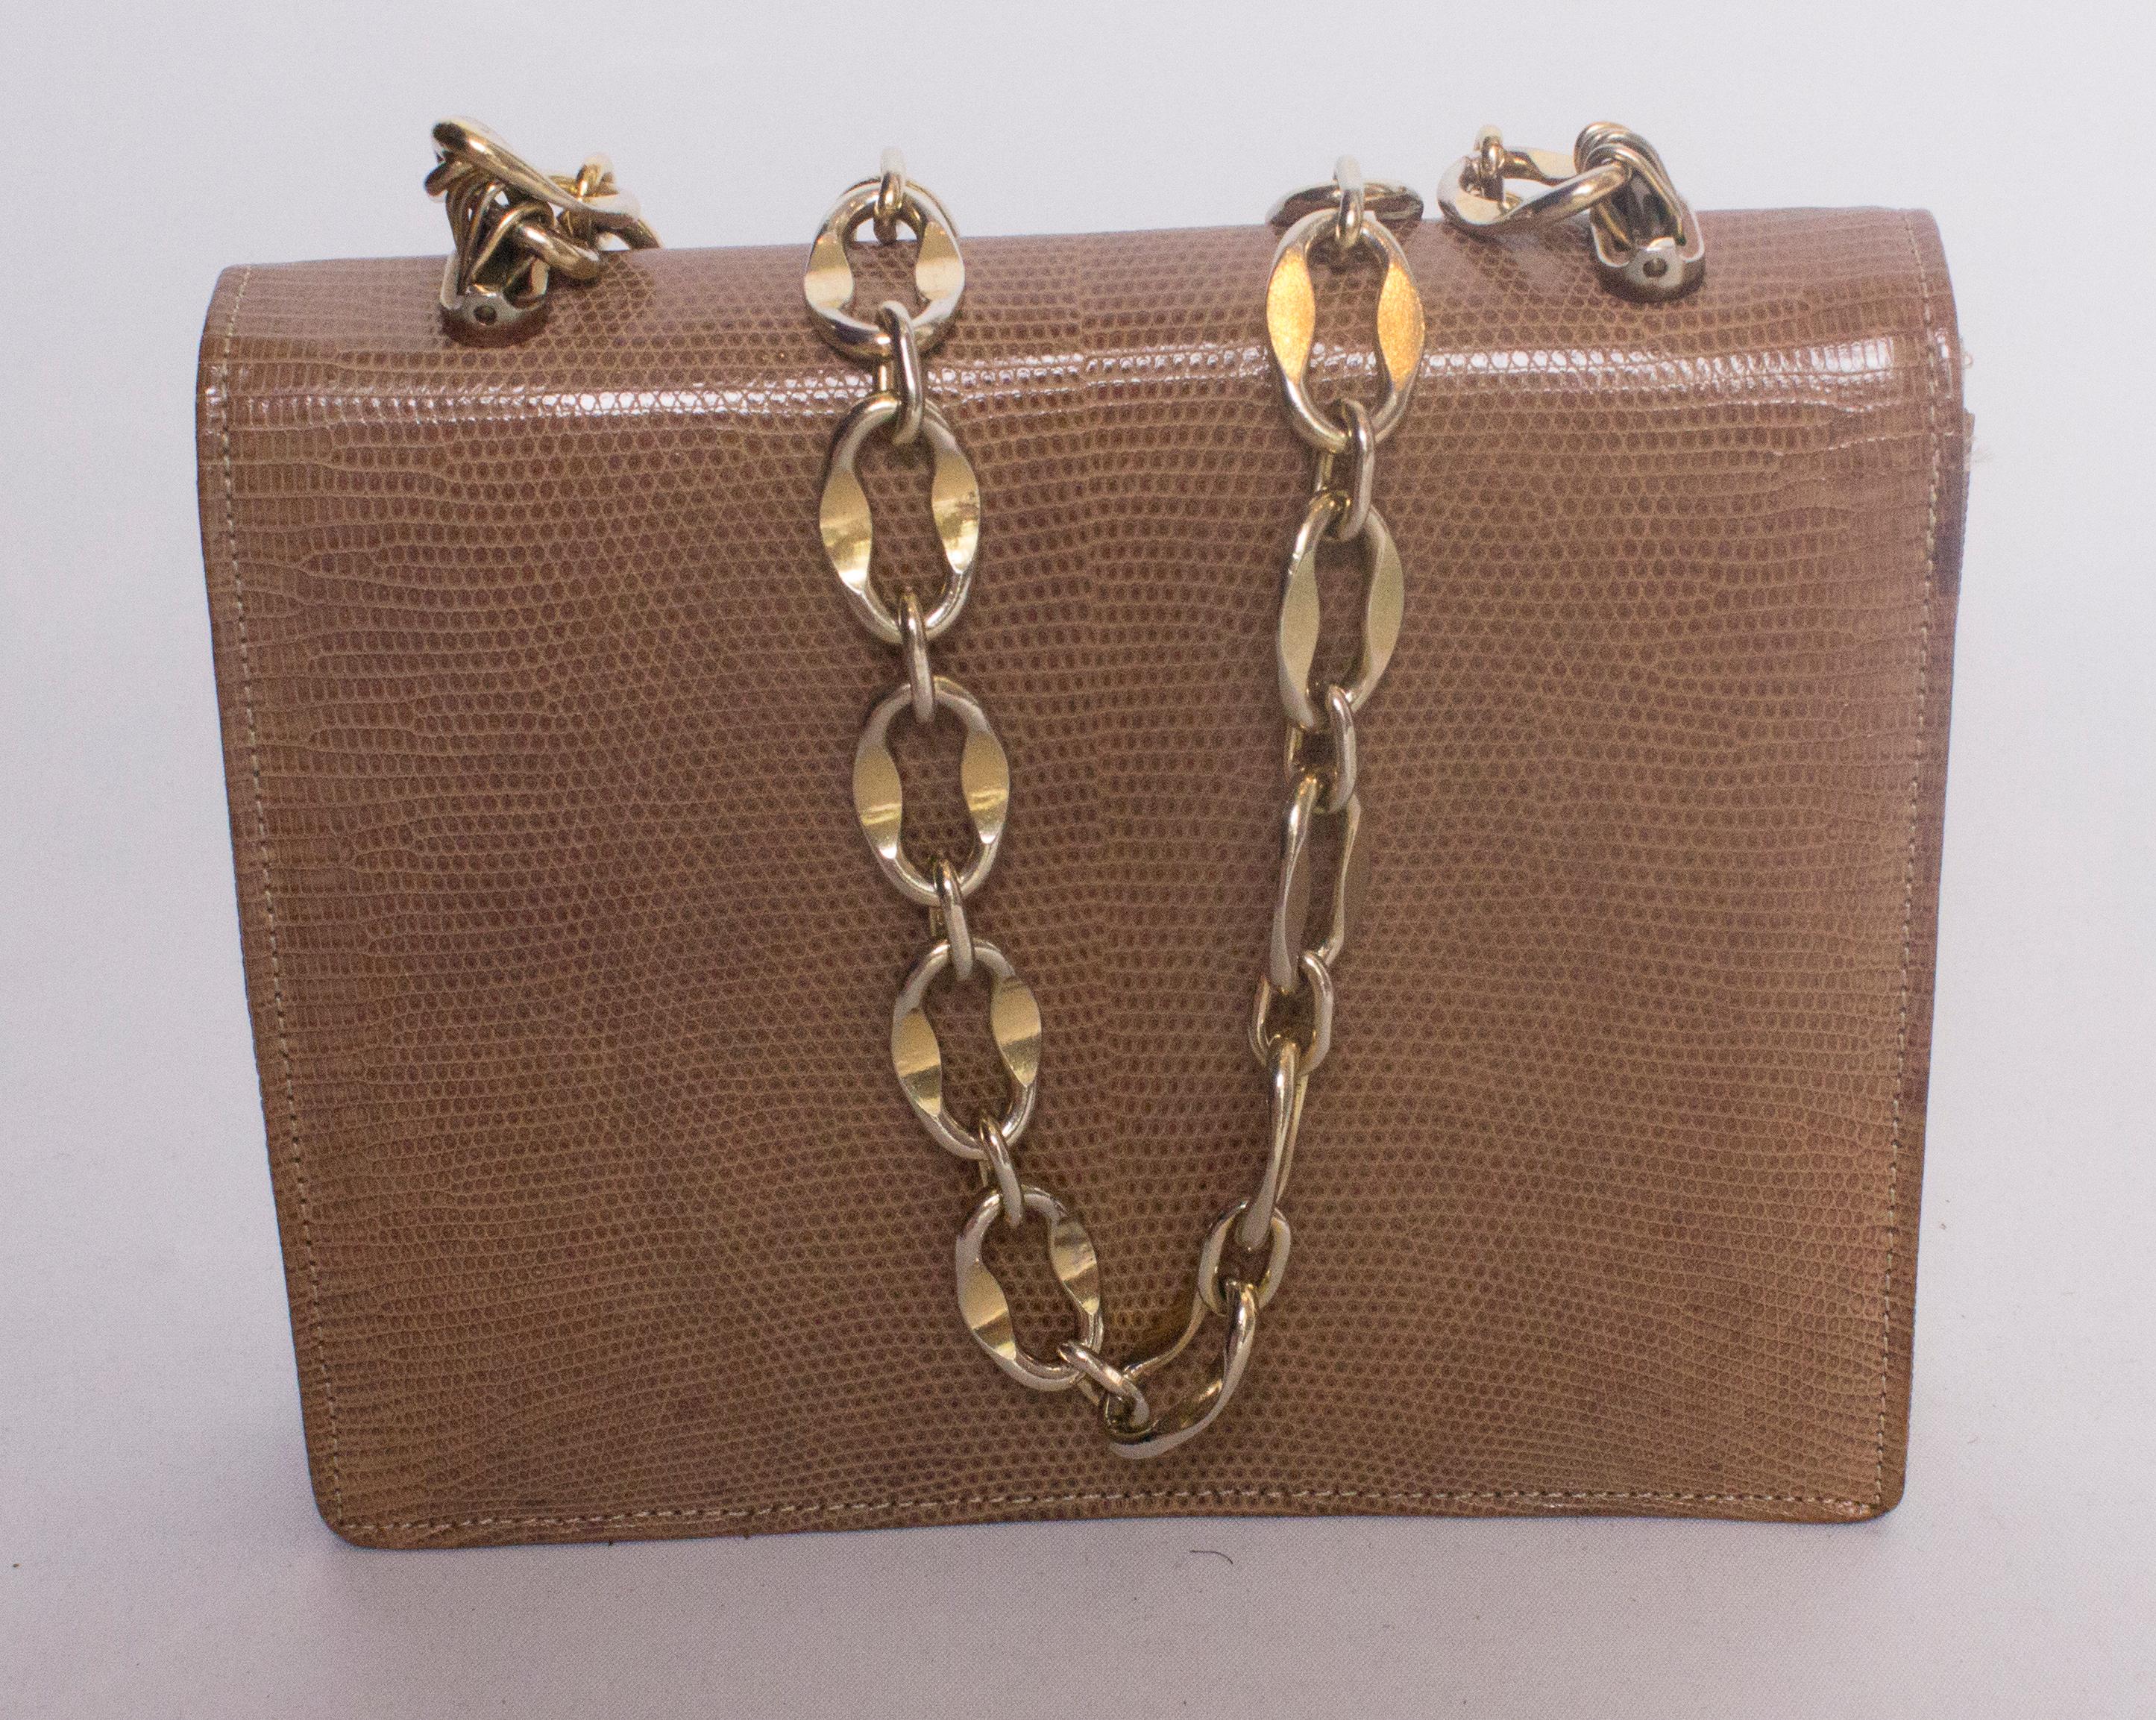 Women's A Vintage 1970s Lizzard Handbag with a Gold Chain